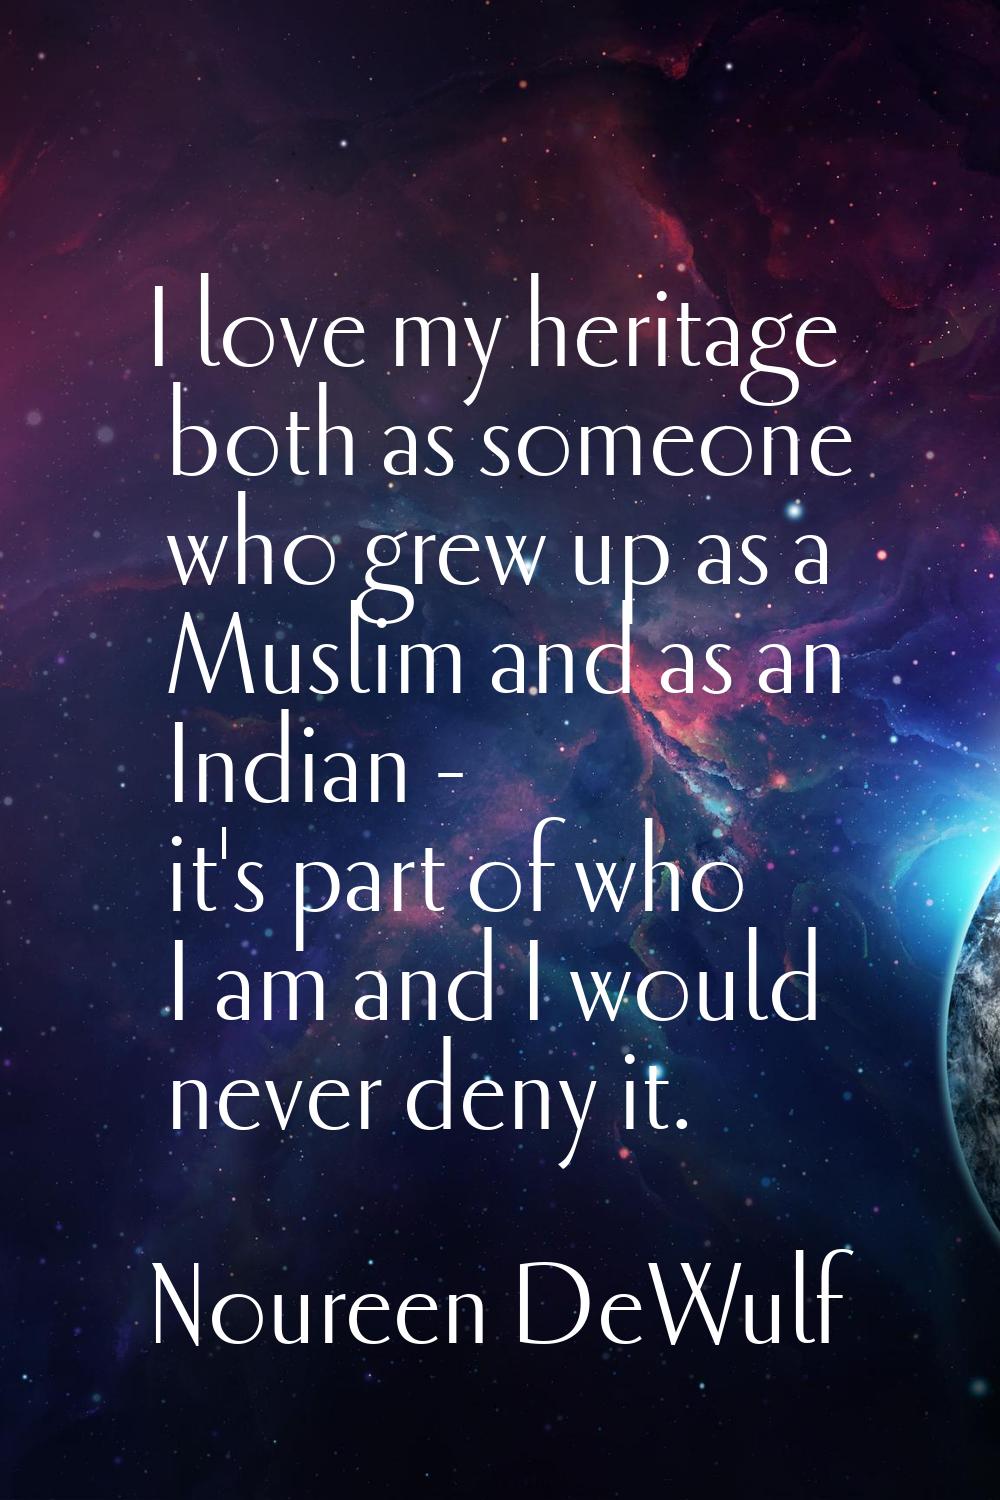 I love my heritage both as someone who grew up as a Muslim and as an Indian - it's part of who I am